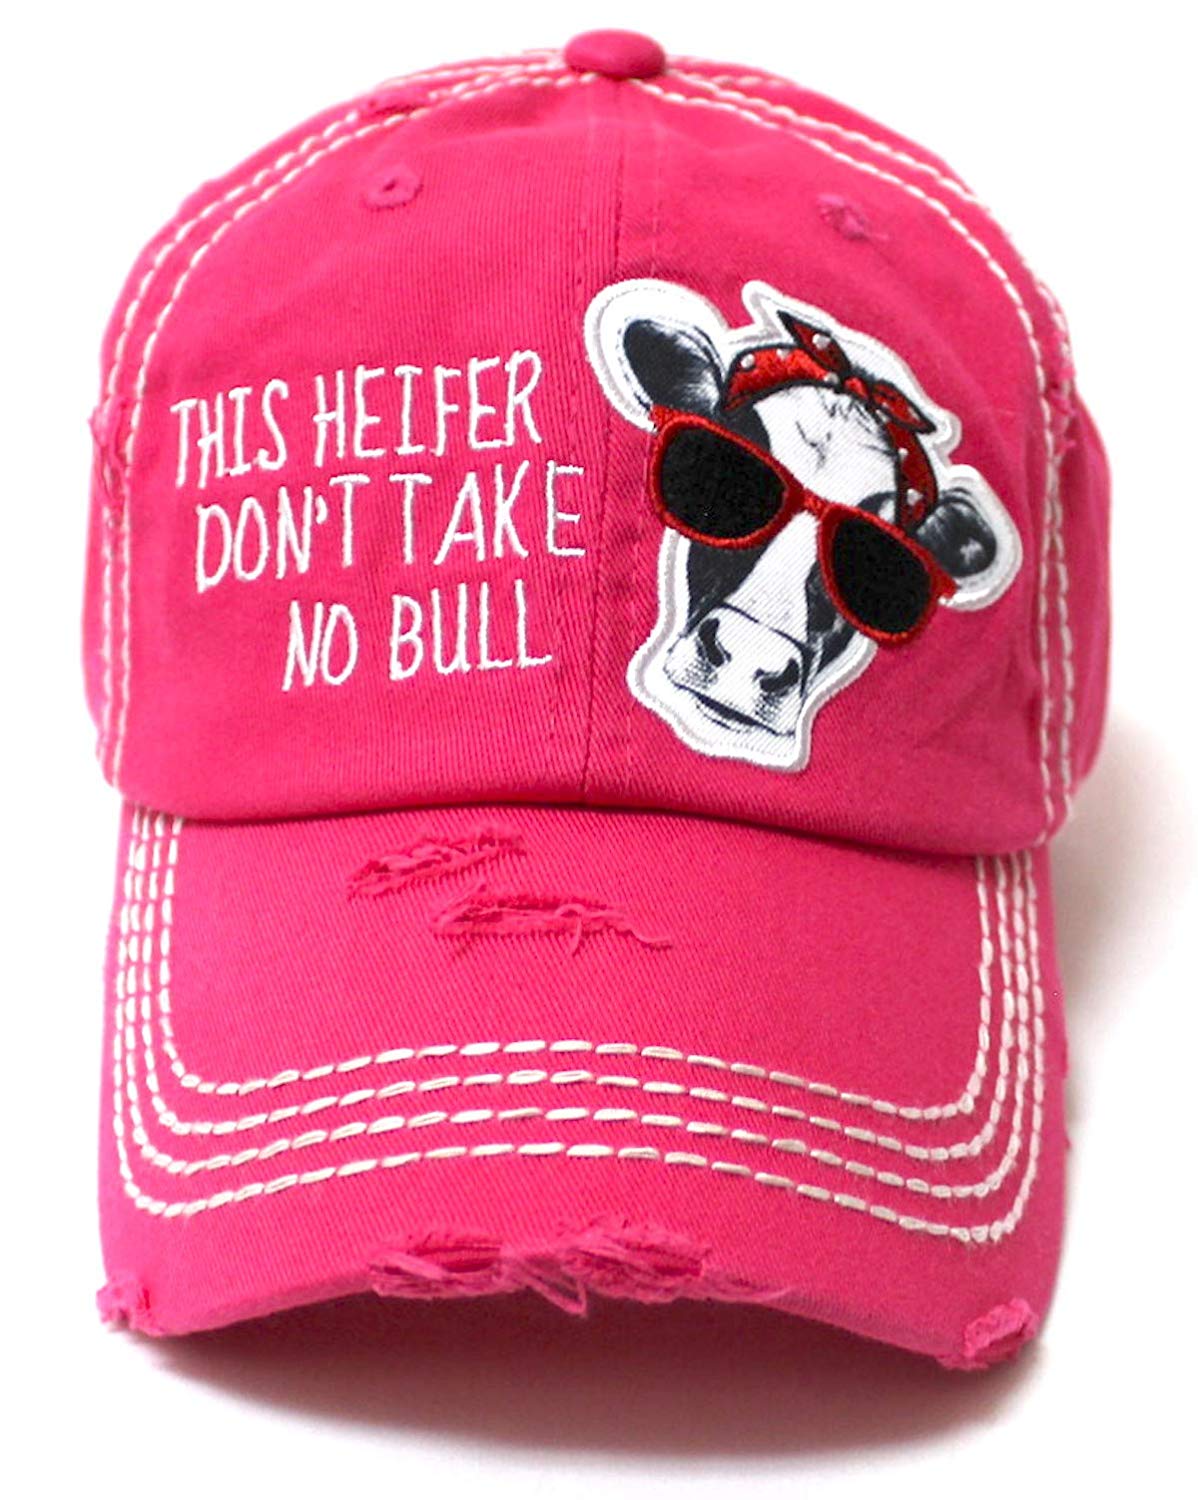 Country Humor Cap This Heifer Don't TAKE NO Bull Red Western Bandana Cow Patch Baseball Hat, Girl Pink - Caps 'N Vintage 